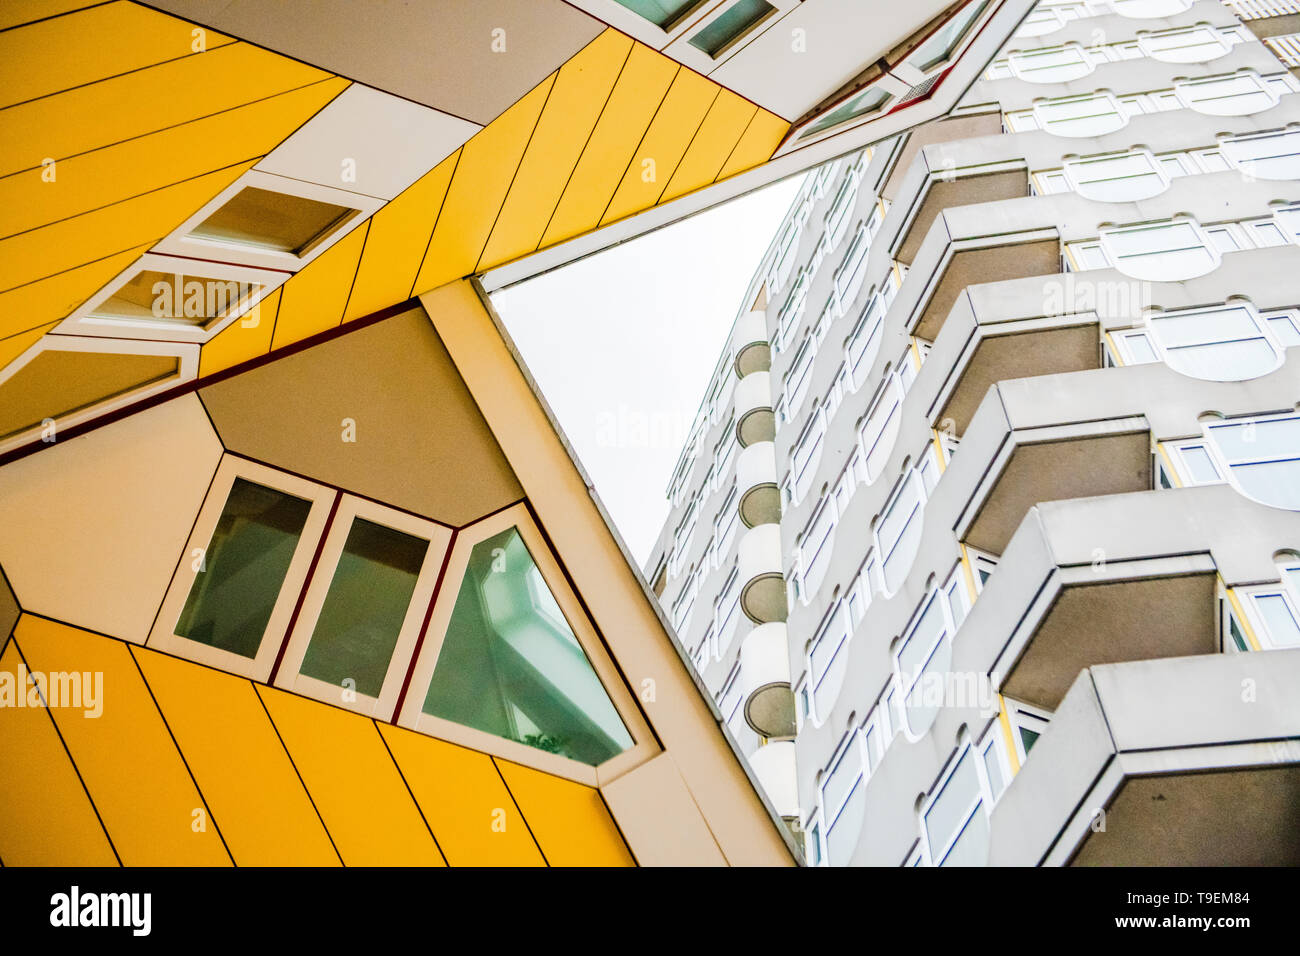 Cube houses Rotterdam - Piet Blom architect - modern architecture - abstract photography - abstract photo - Dutch tourism Netherlands tourism Stock Photo